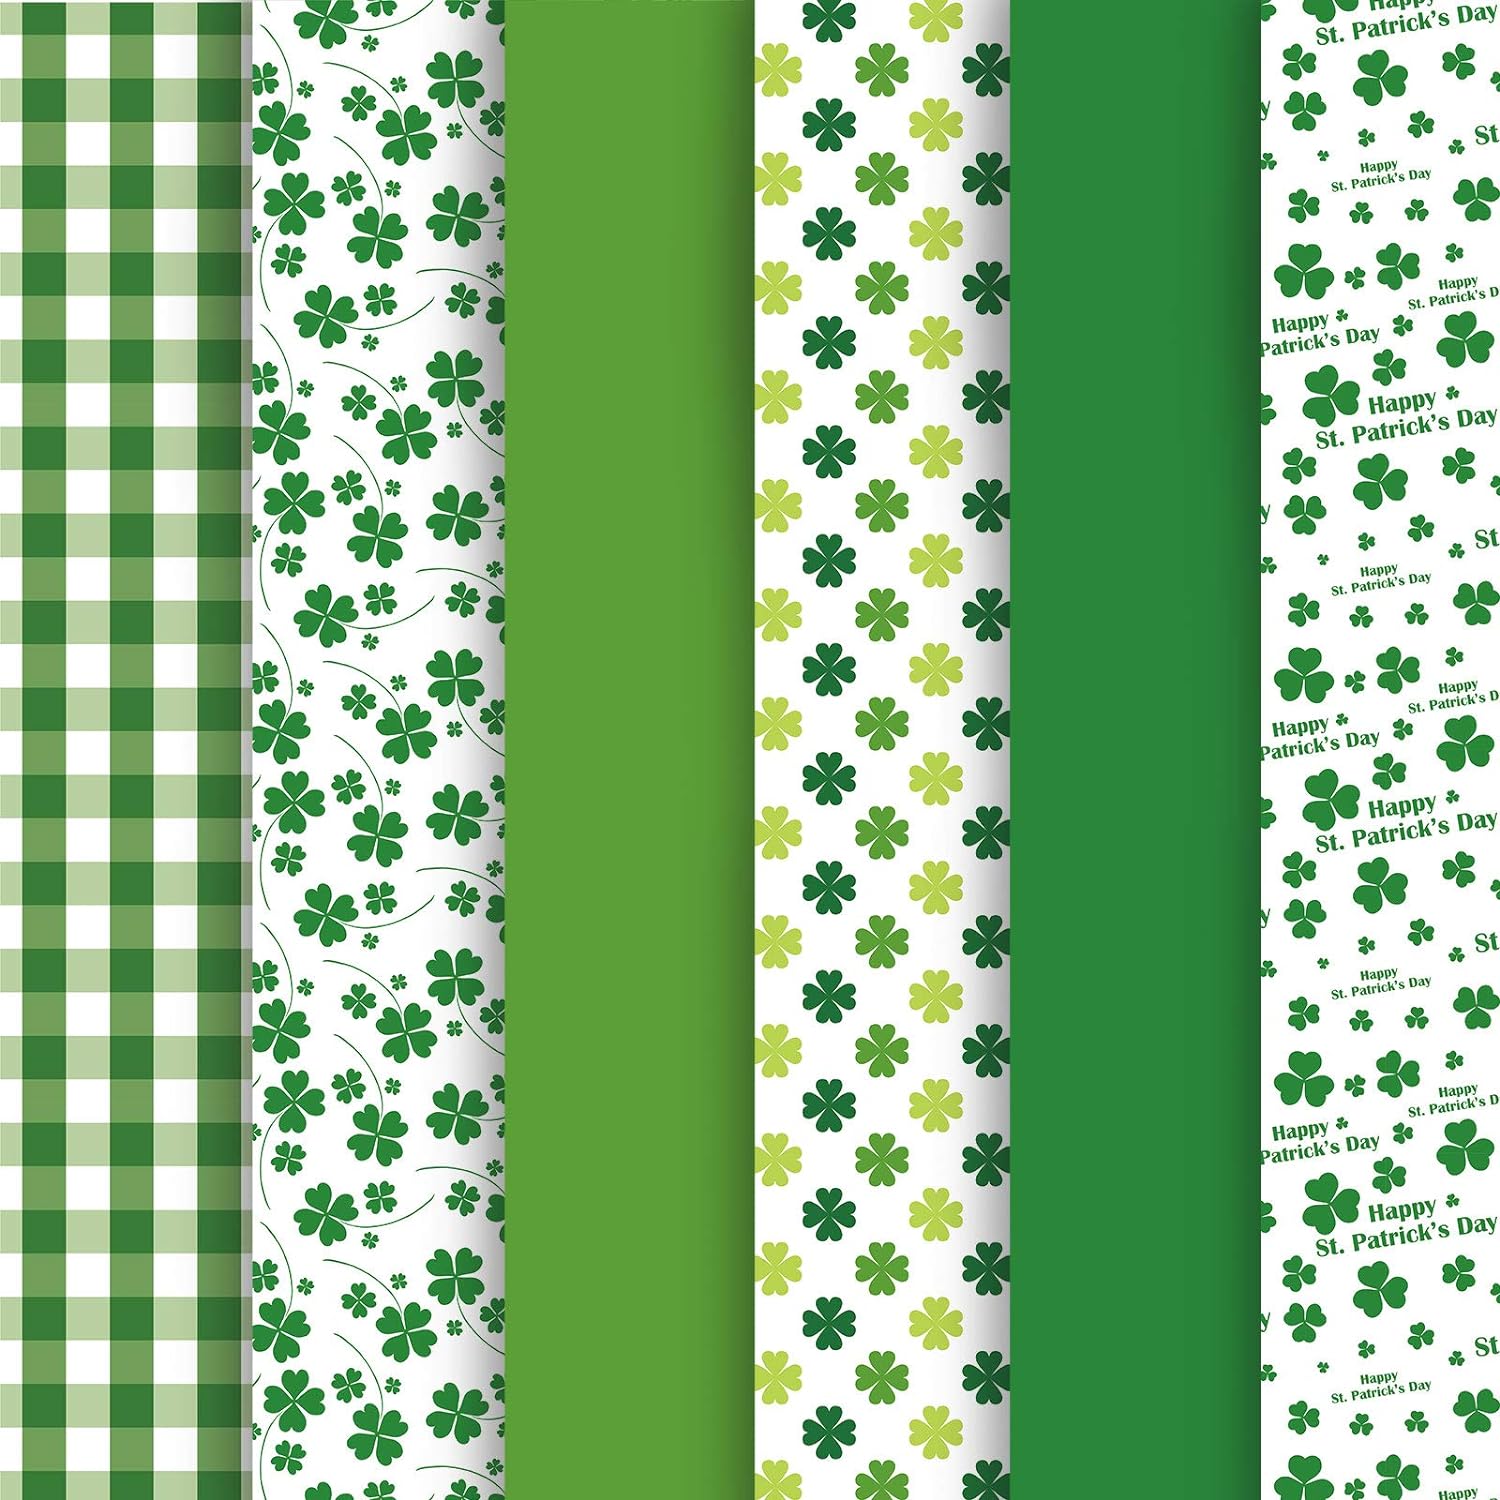 Whaline St. Patrick' Day Tissue Paper 90 Sheet Green Plaid Shamrock Clover Pattern Art Tissue Bulk Irish Spring Holiday Wrapping Paper for DIY Crafts Party Gift Bag Packing Birthday Favors, 14 x 20